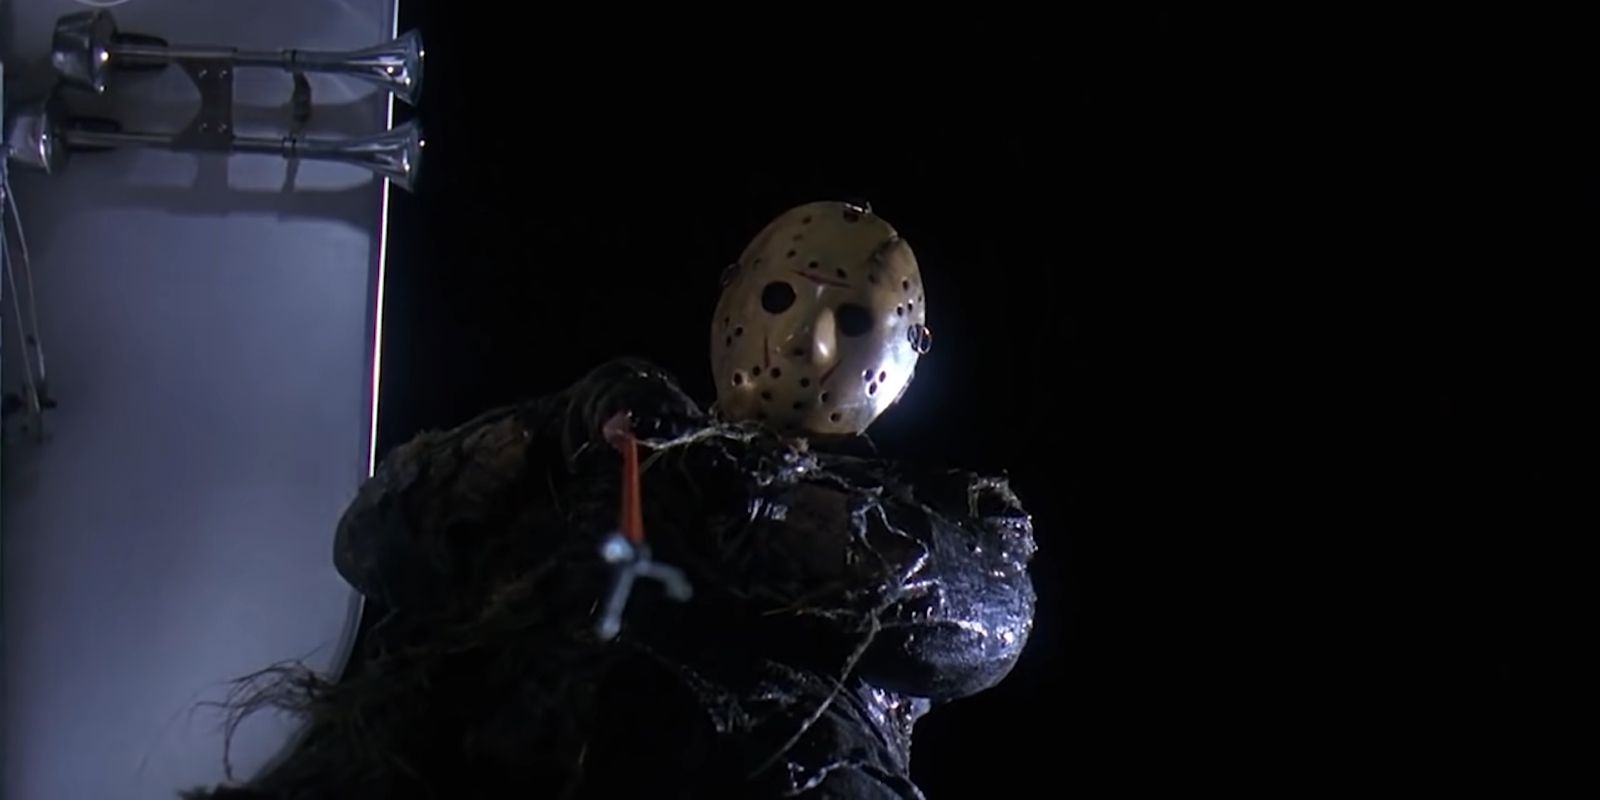 Friday The 13th 10 Worst Kills Of The Franchise